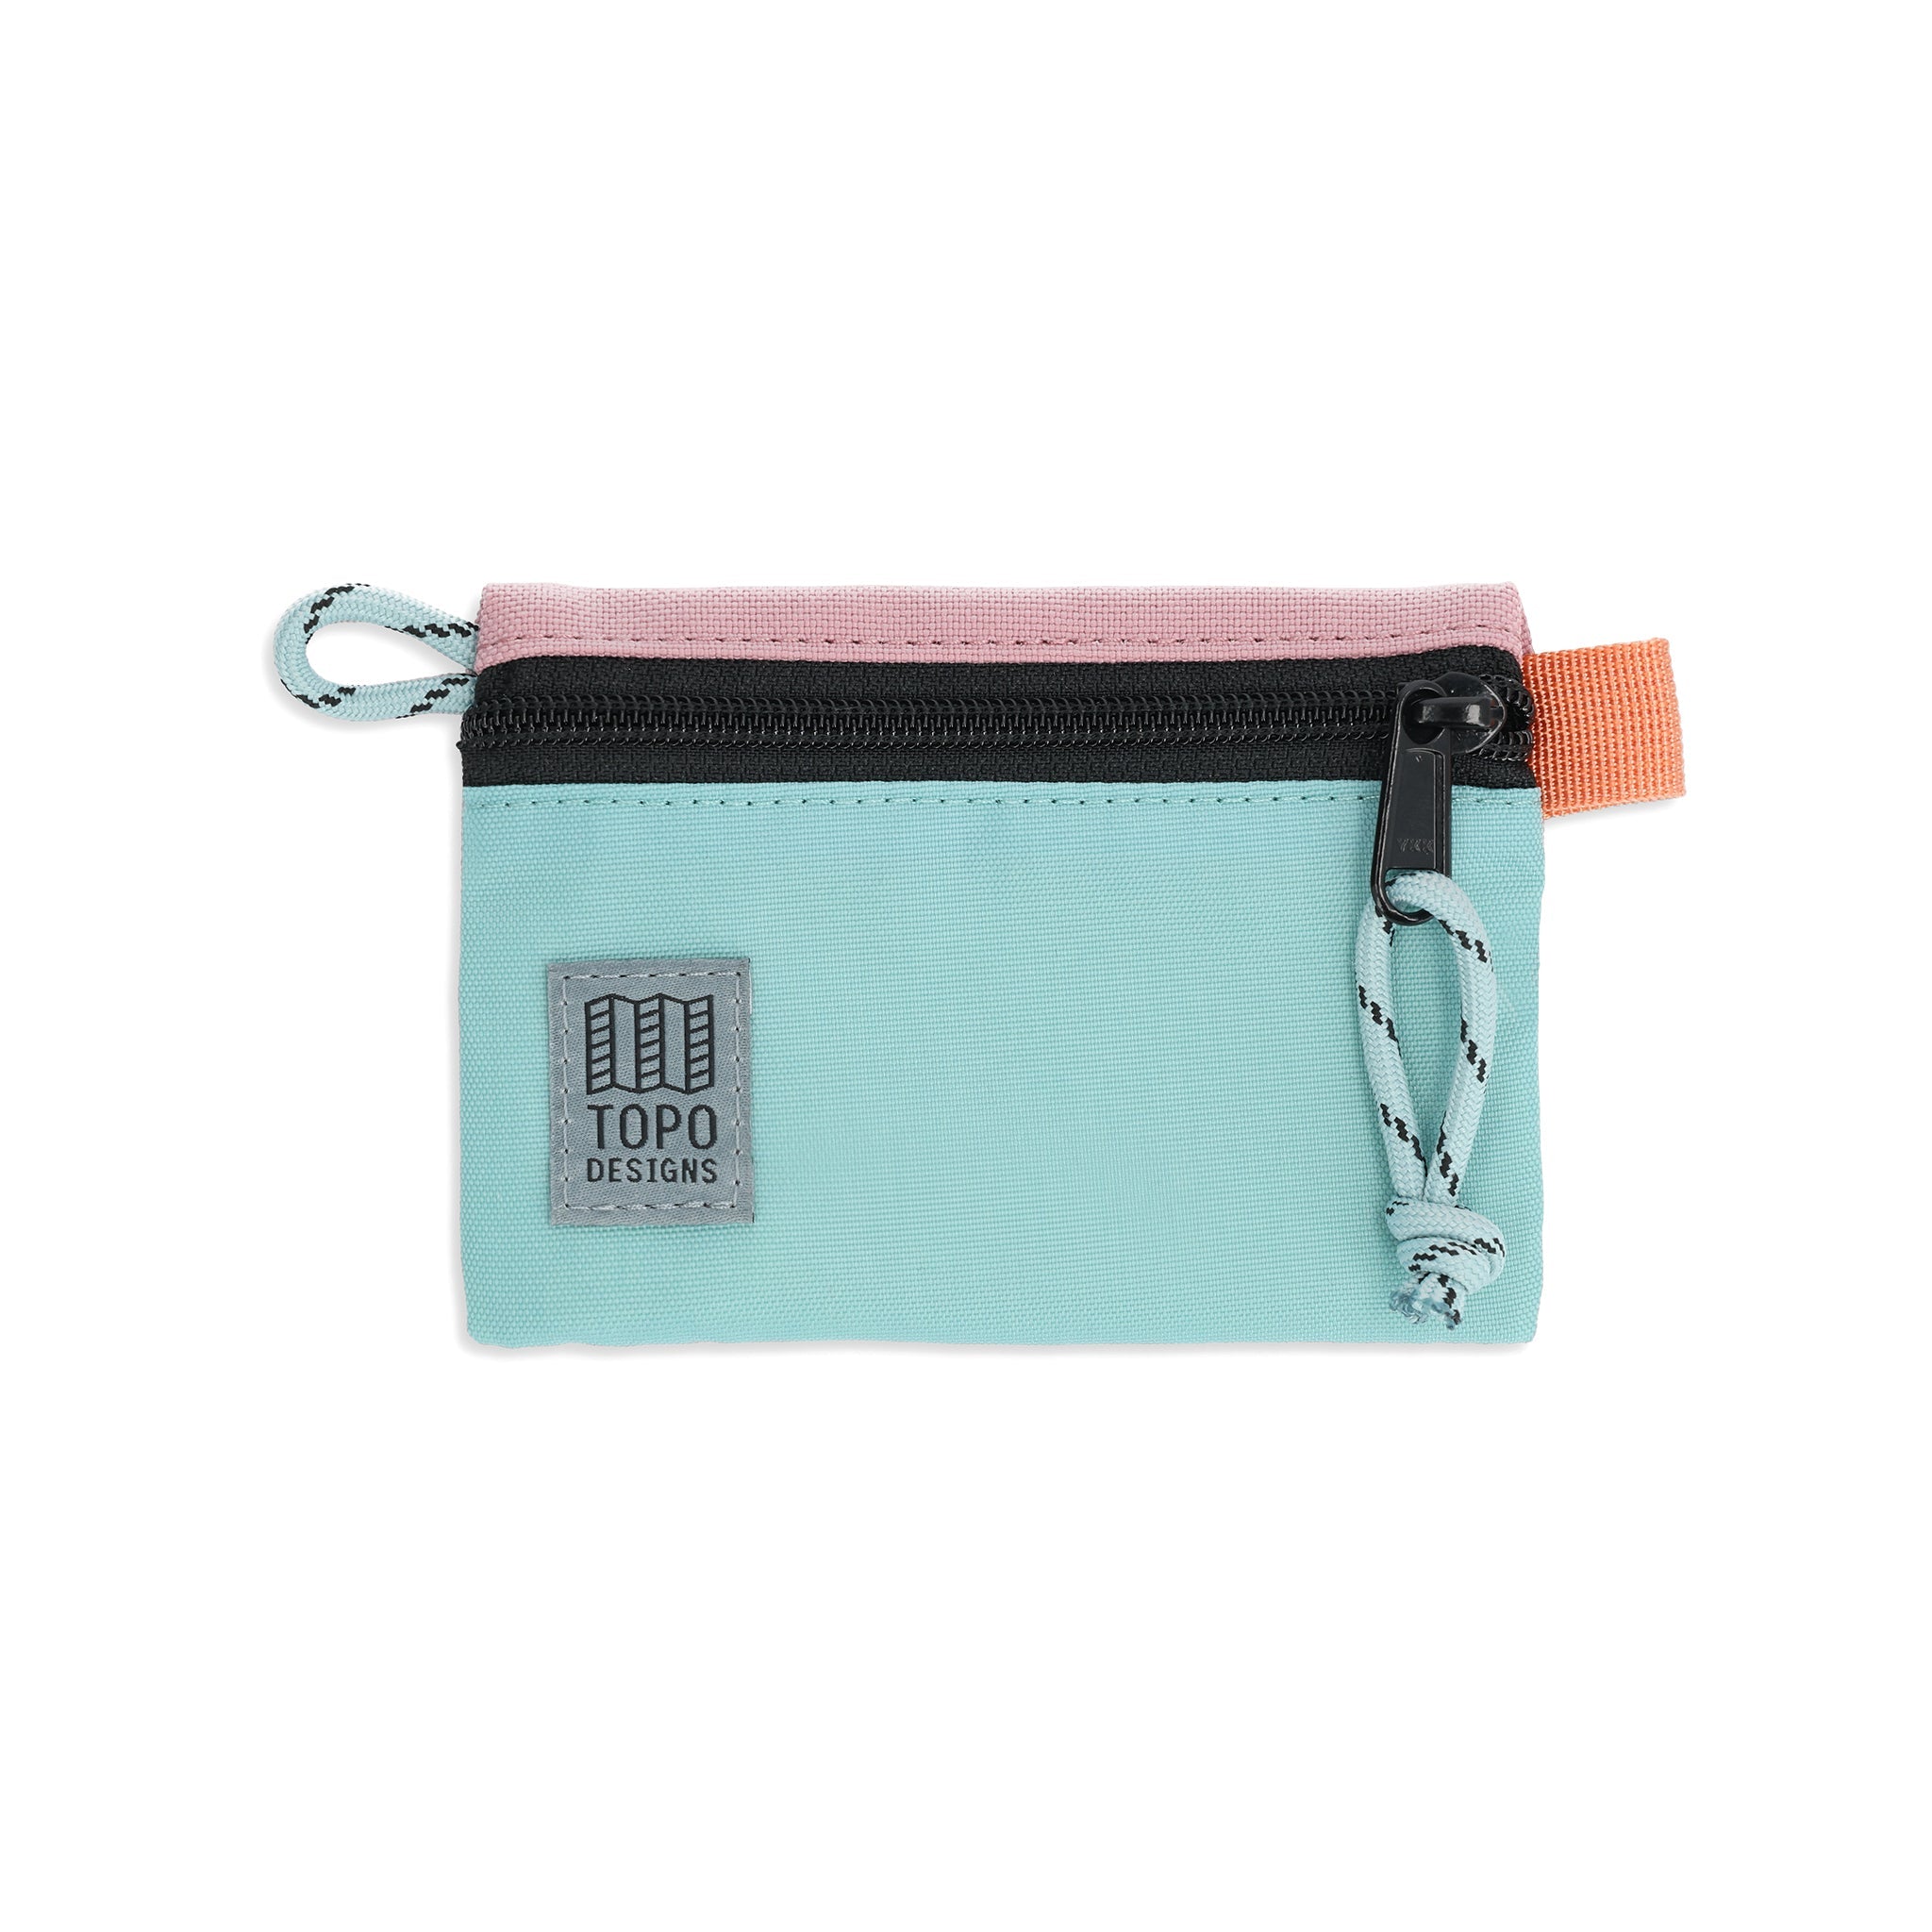 Front View of Topo Designs Accessory Bags in size "Micro" "Rose / Geode Green"